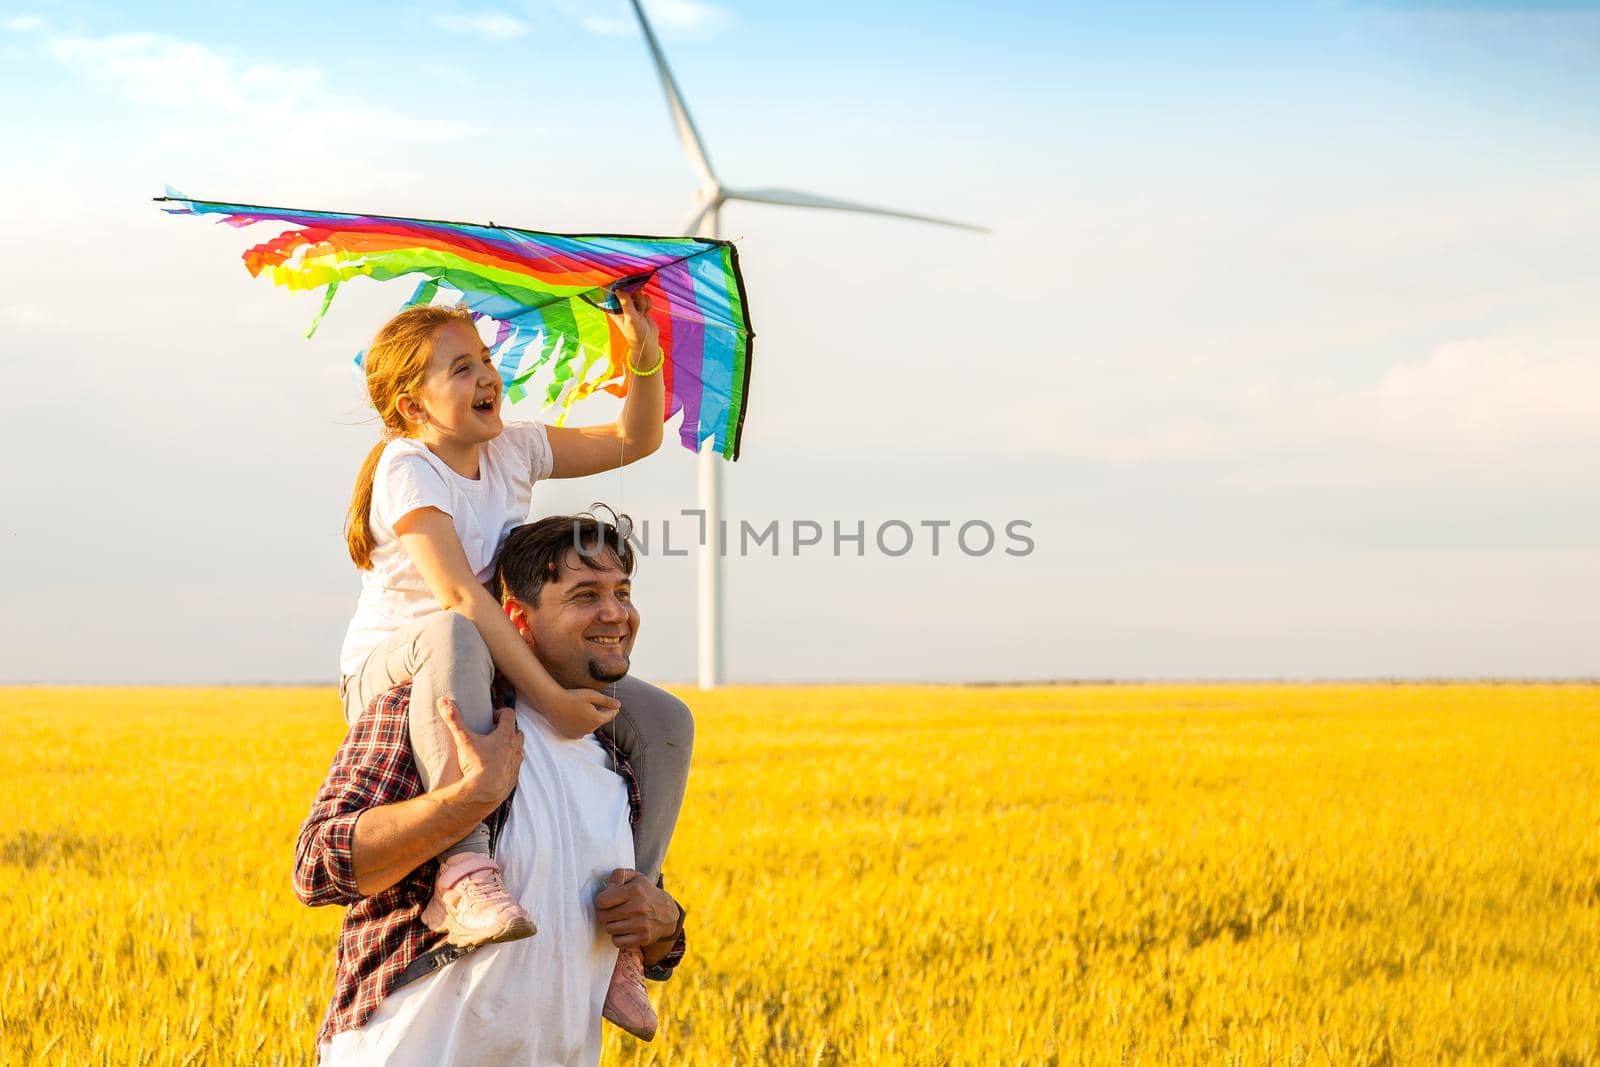 Happy father's day. Father and daughter having fun, playing with kite together on the Wheat Field on Bright Summer day